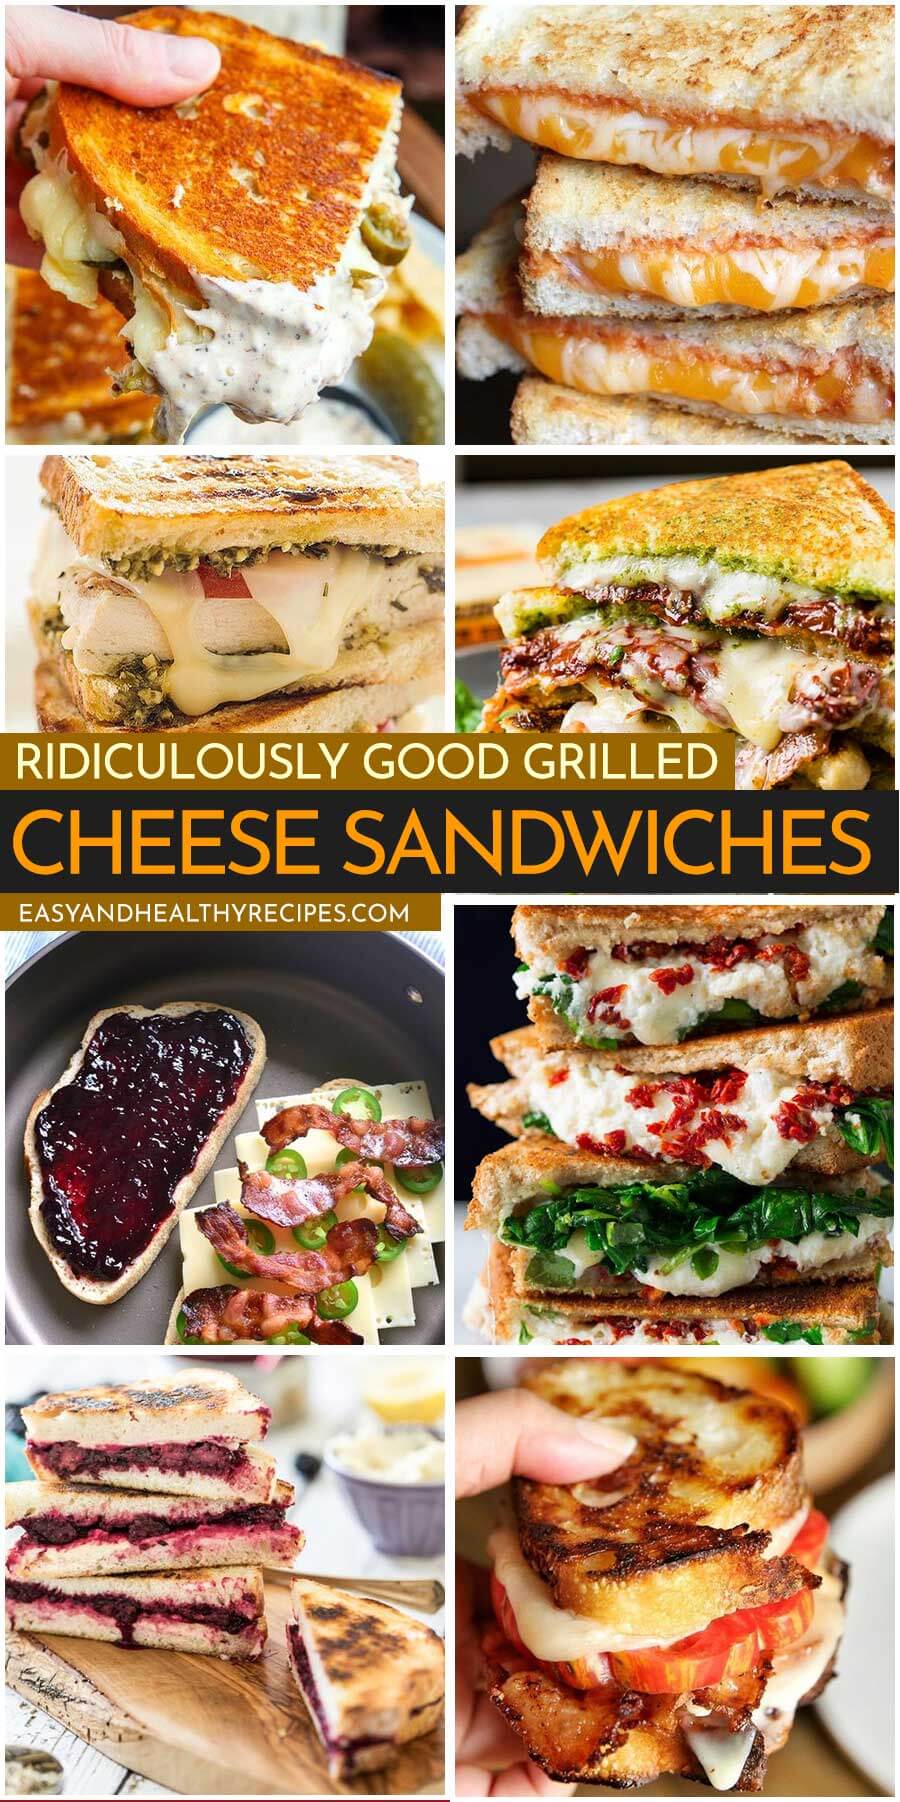 Grilled Cheese Sandwiches: “Addictive” Breakfast And Lunch